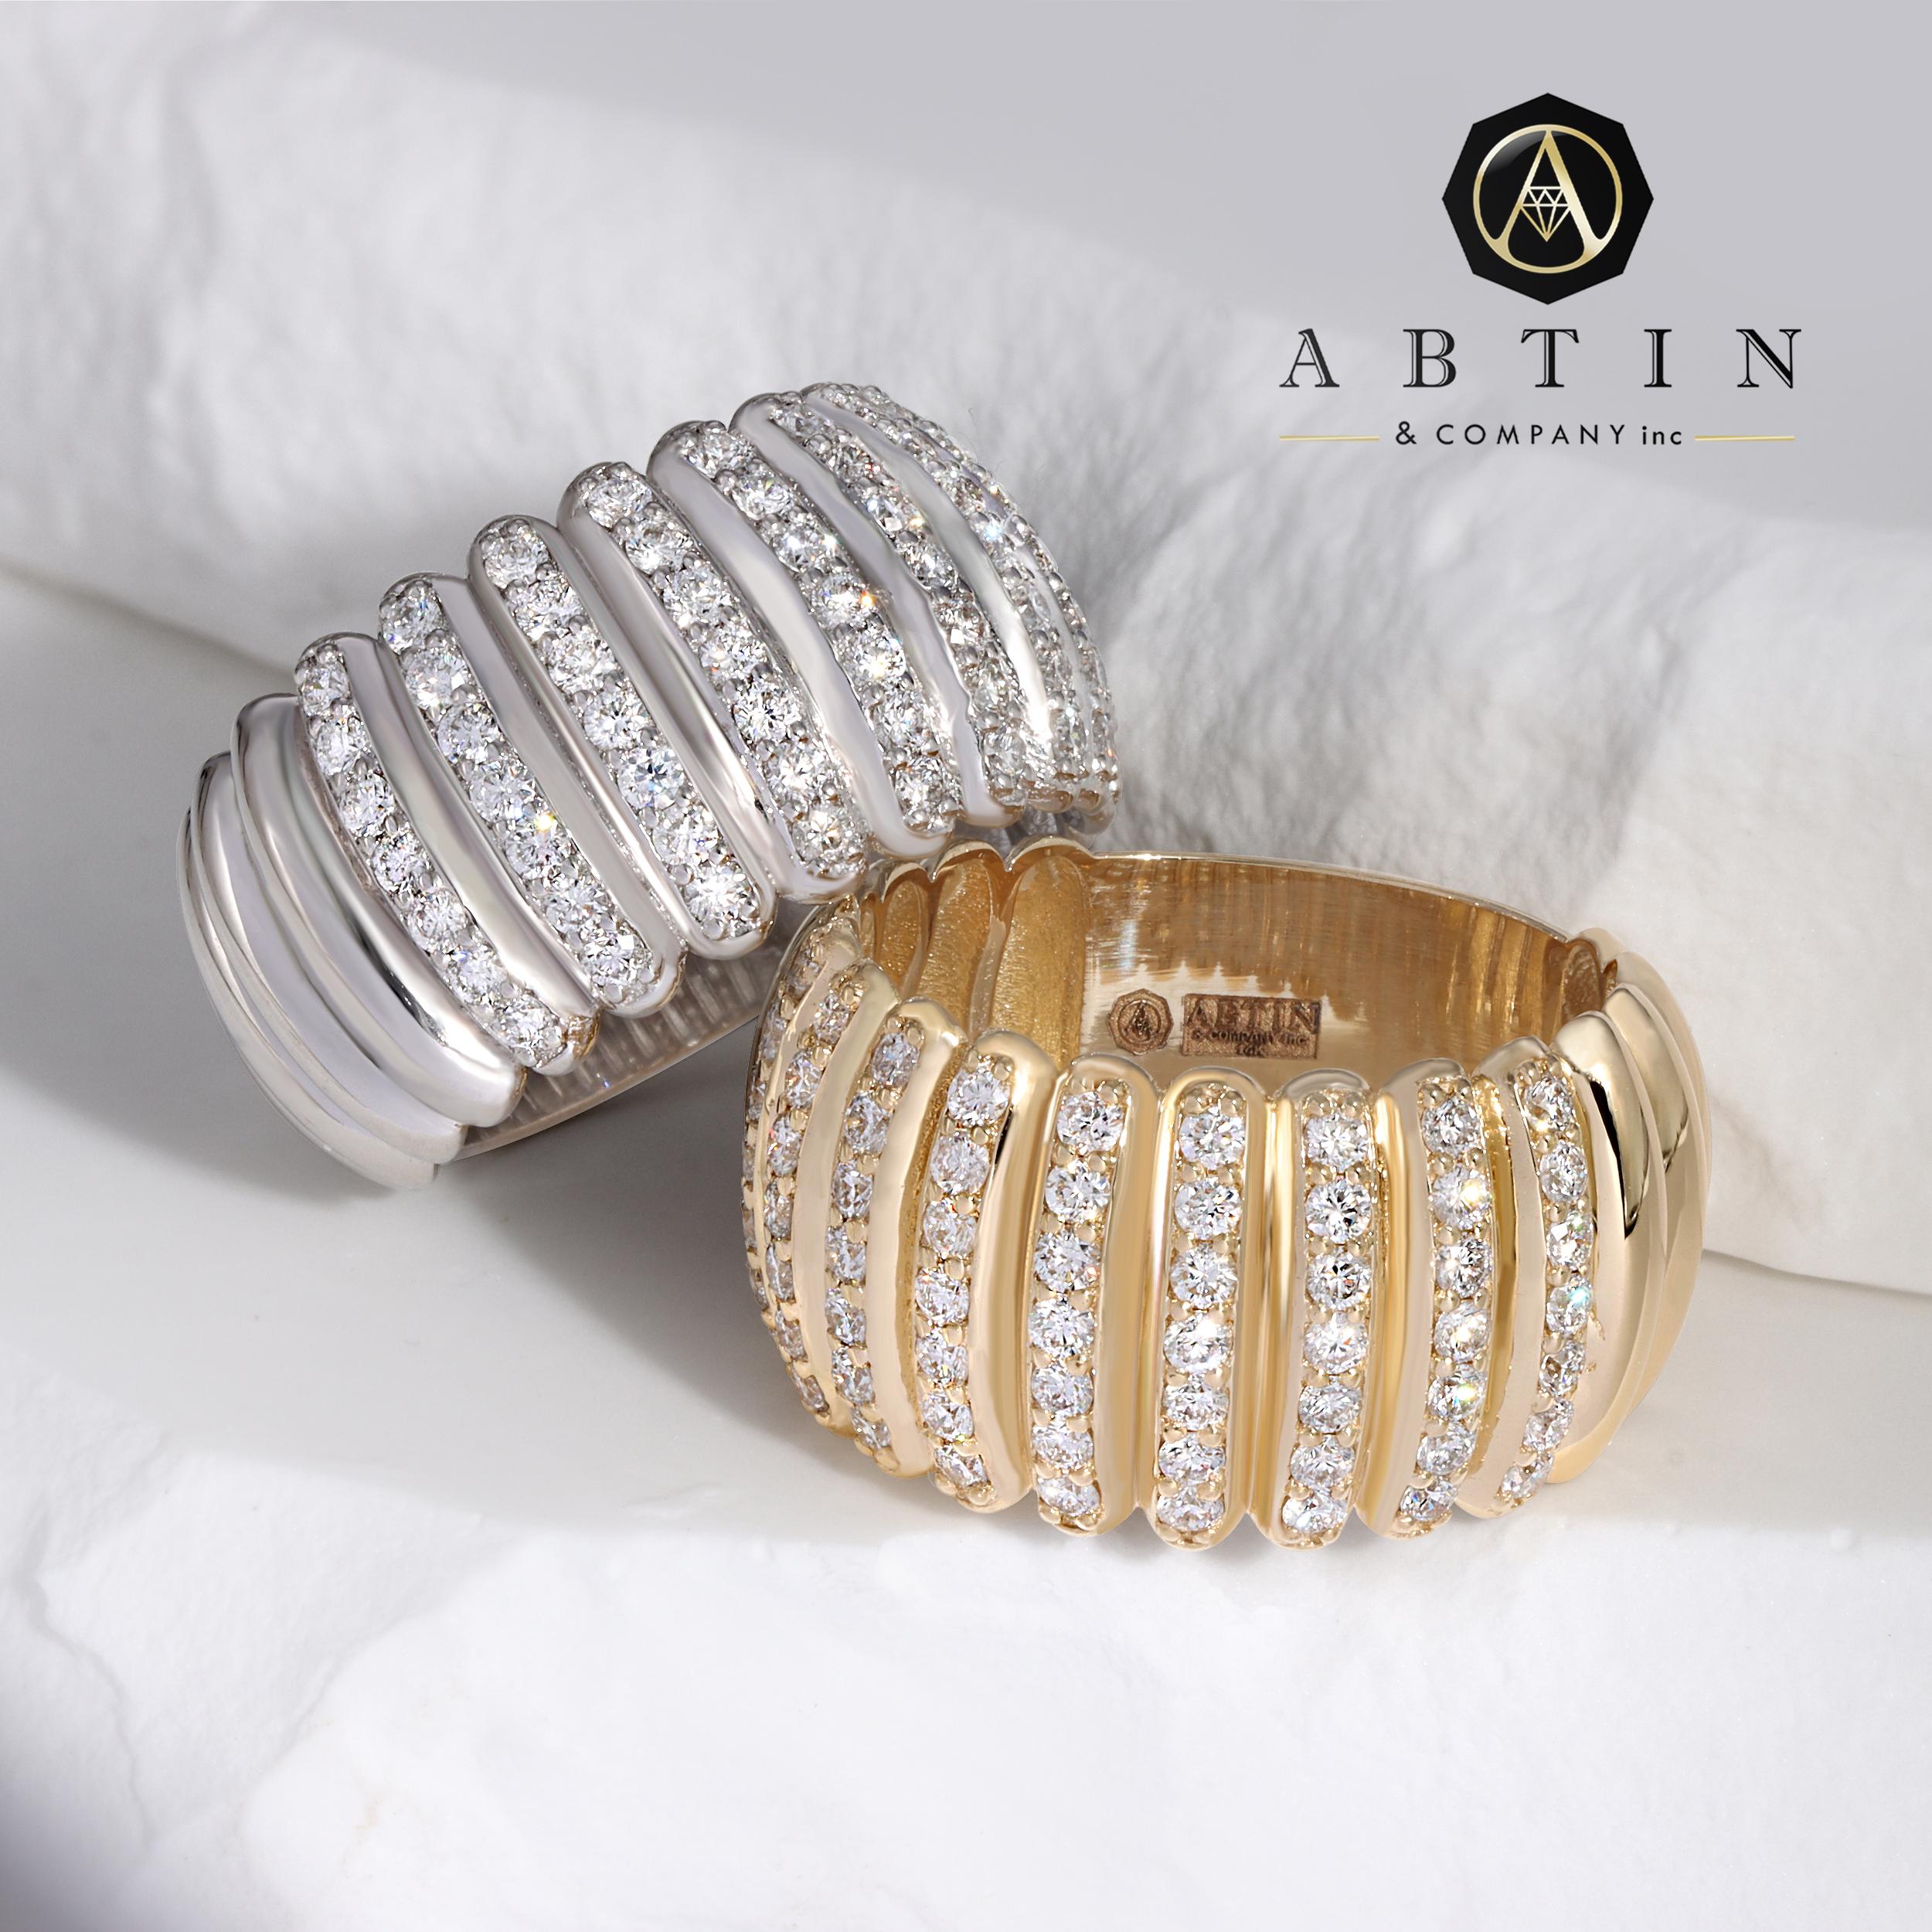 Crafted in 14K gold, this delightful line dome ring showcases 0.91 carats of round diamonds, in a tasteful classic look. This ring is easy and comfortable to slip on and off and a durable staple piece for modern women. Whether you were it solo or in